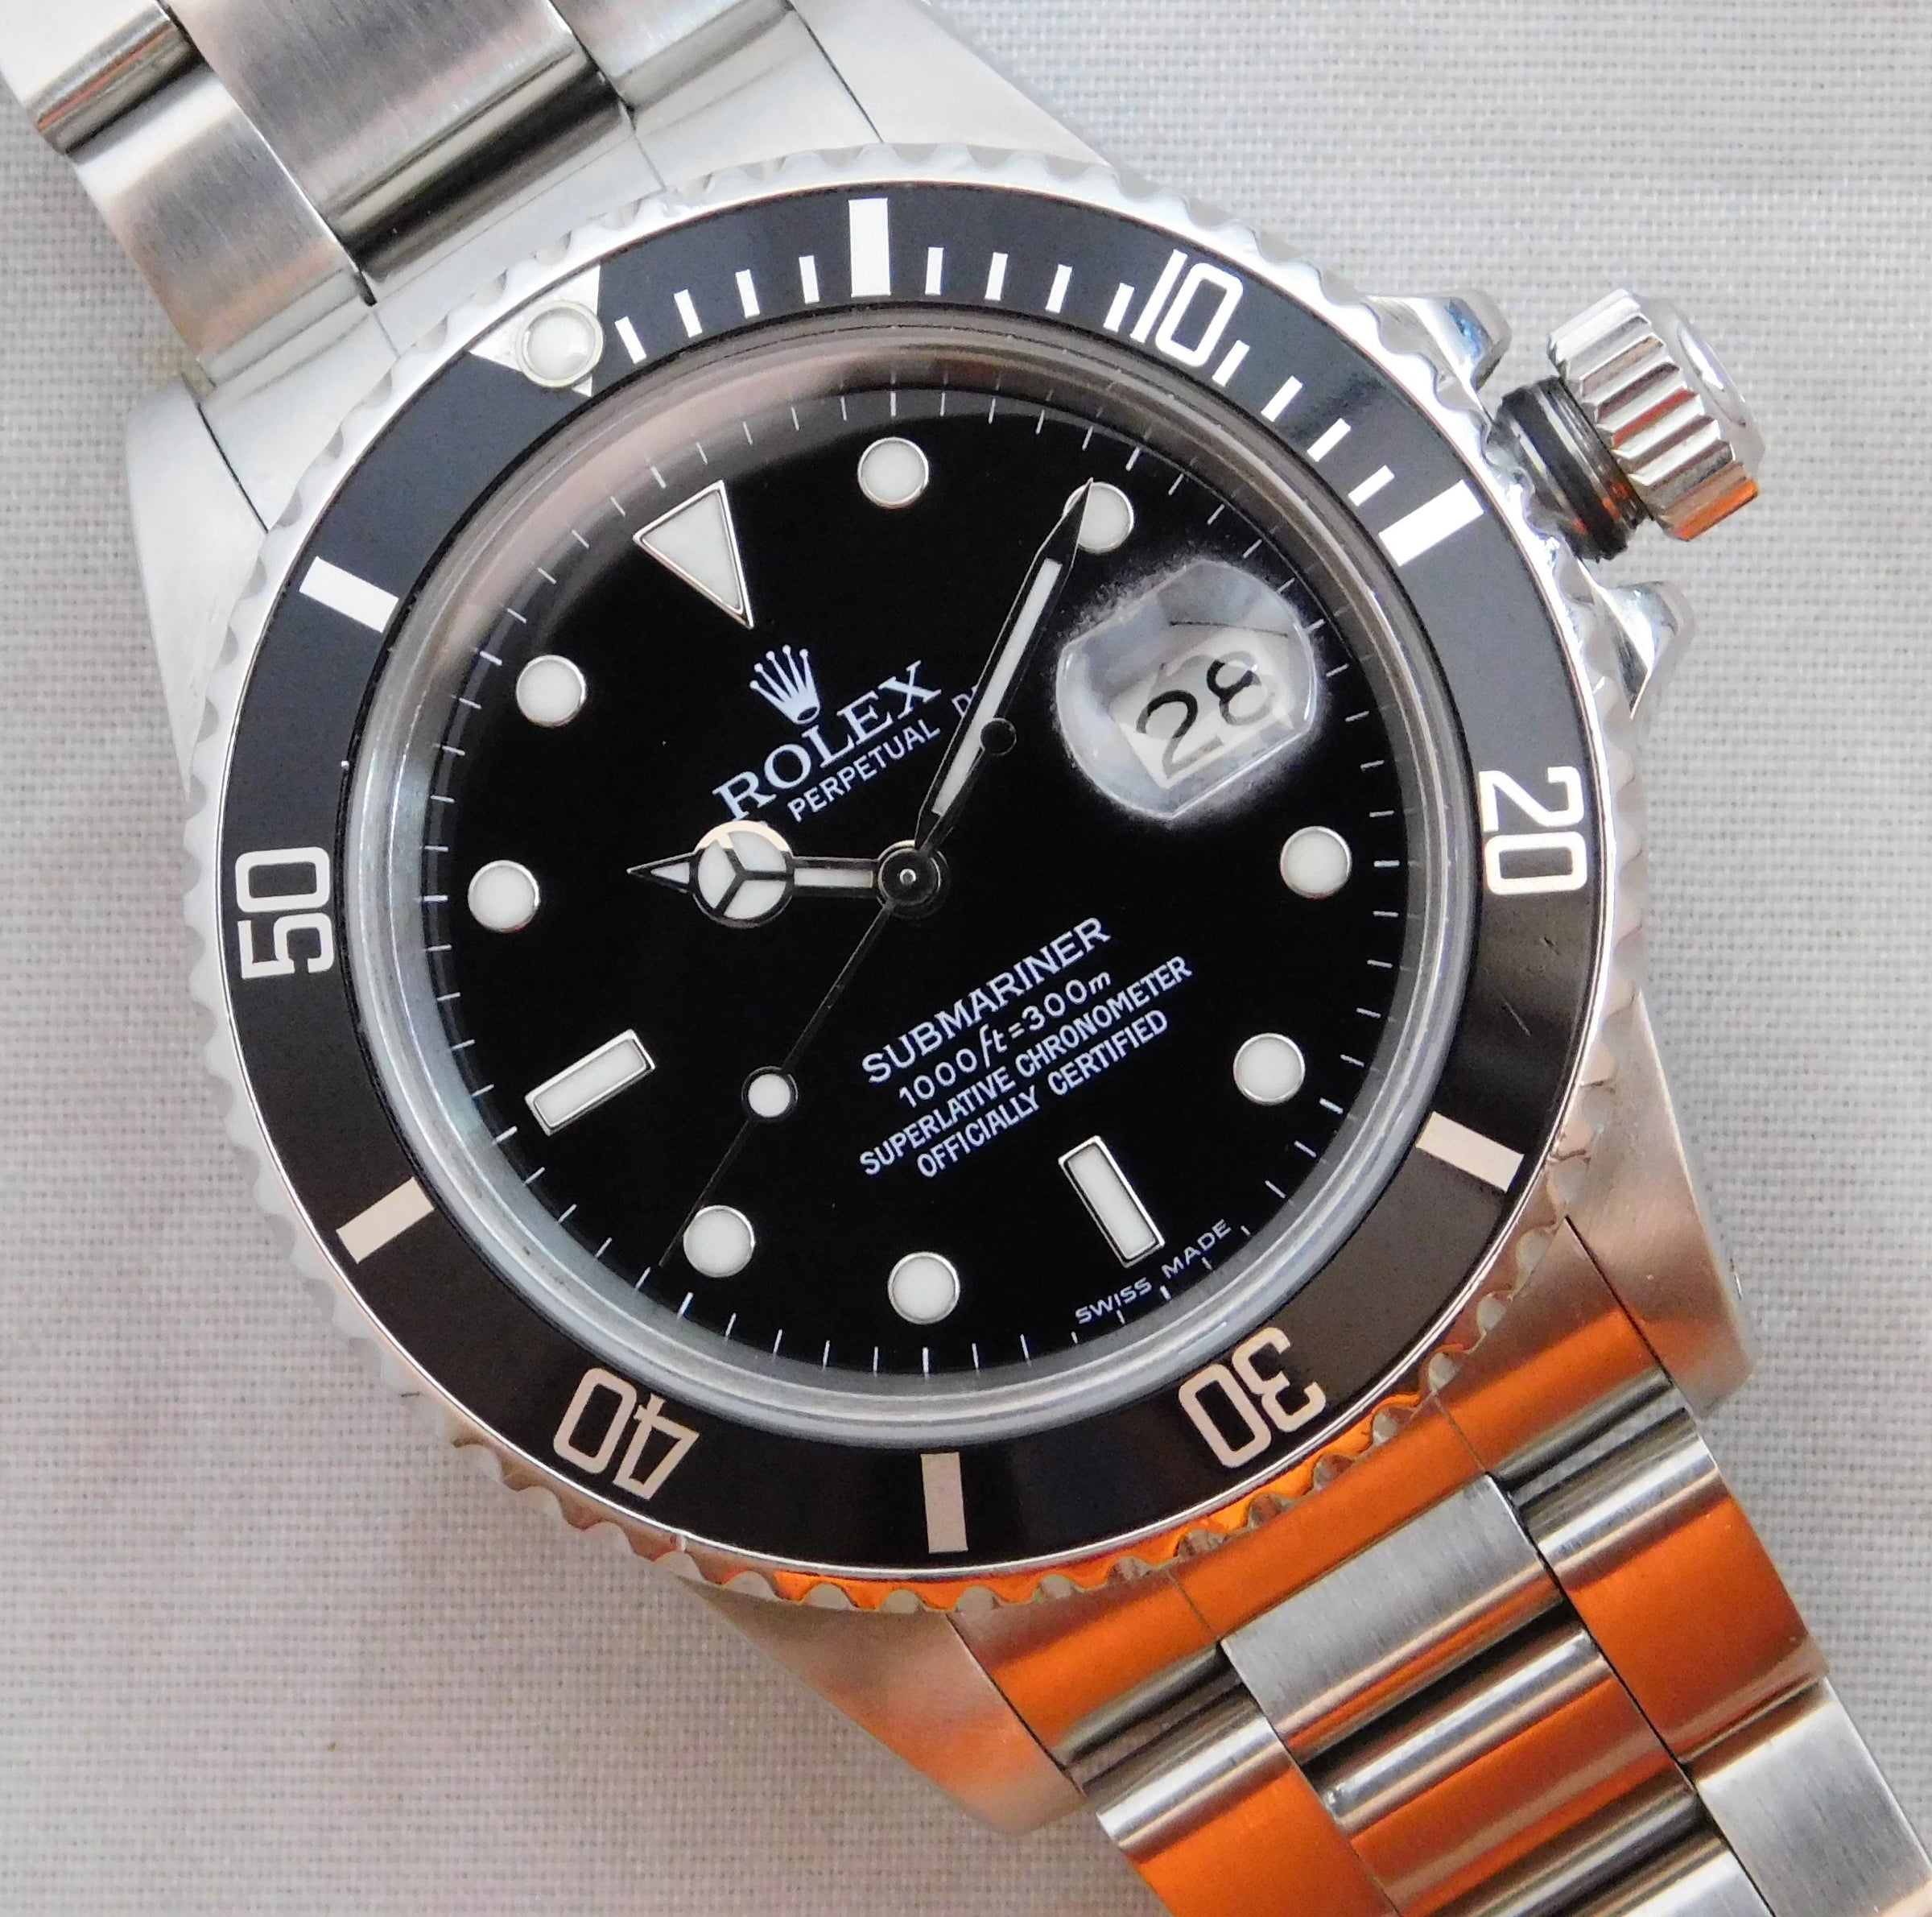 Rolex Submariner Date 16800 Black Dial Stainless Steel Automatic Watch